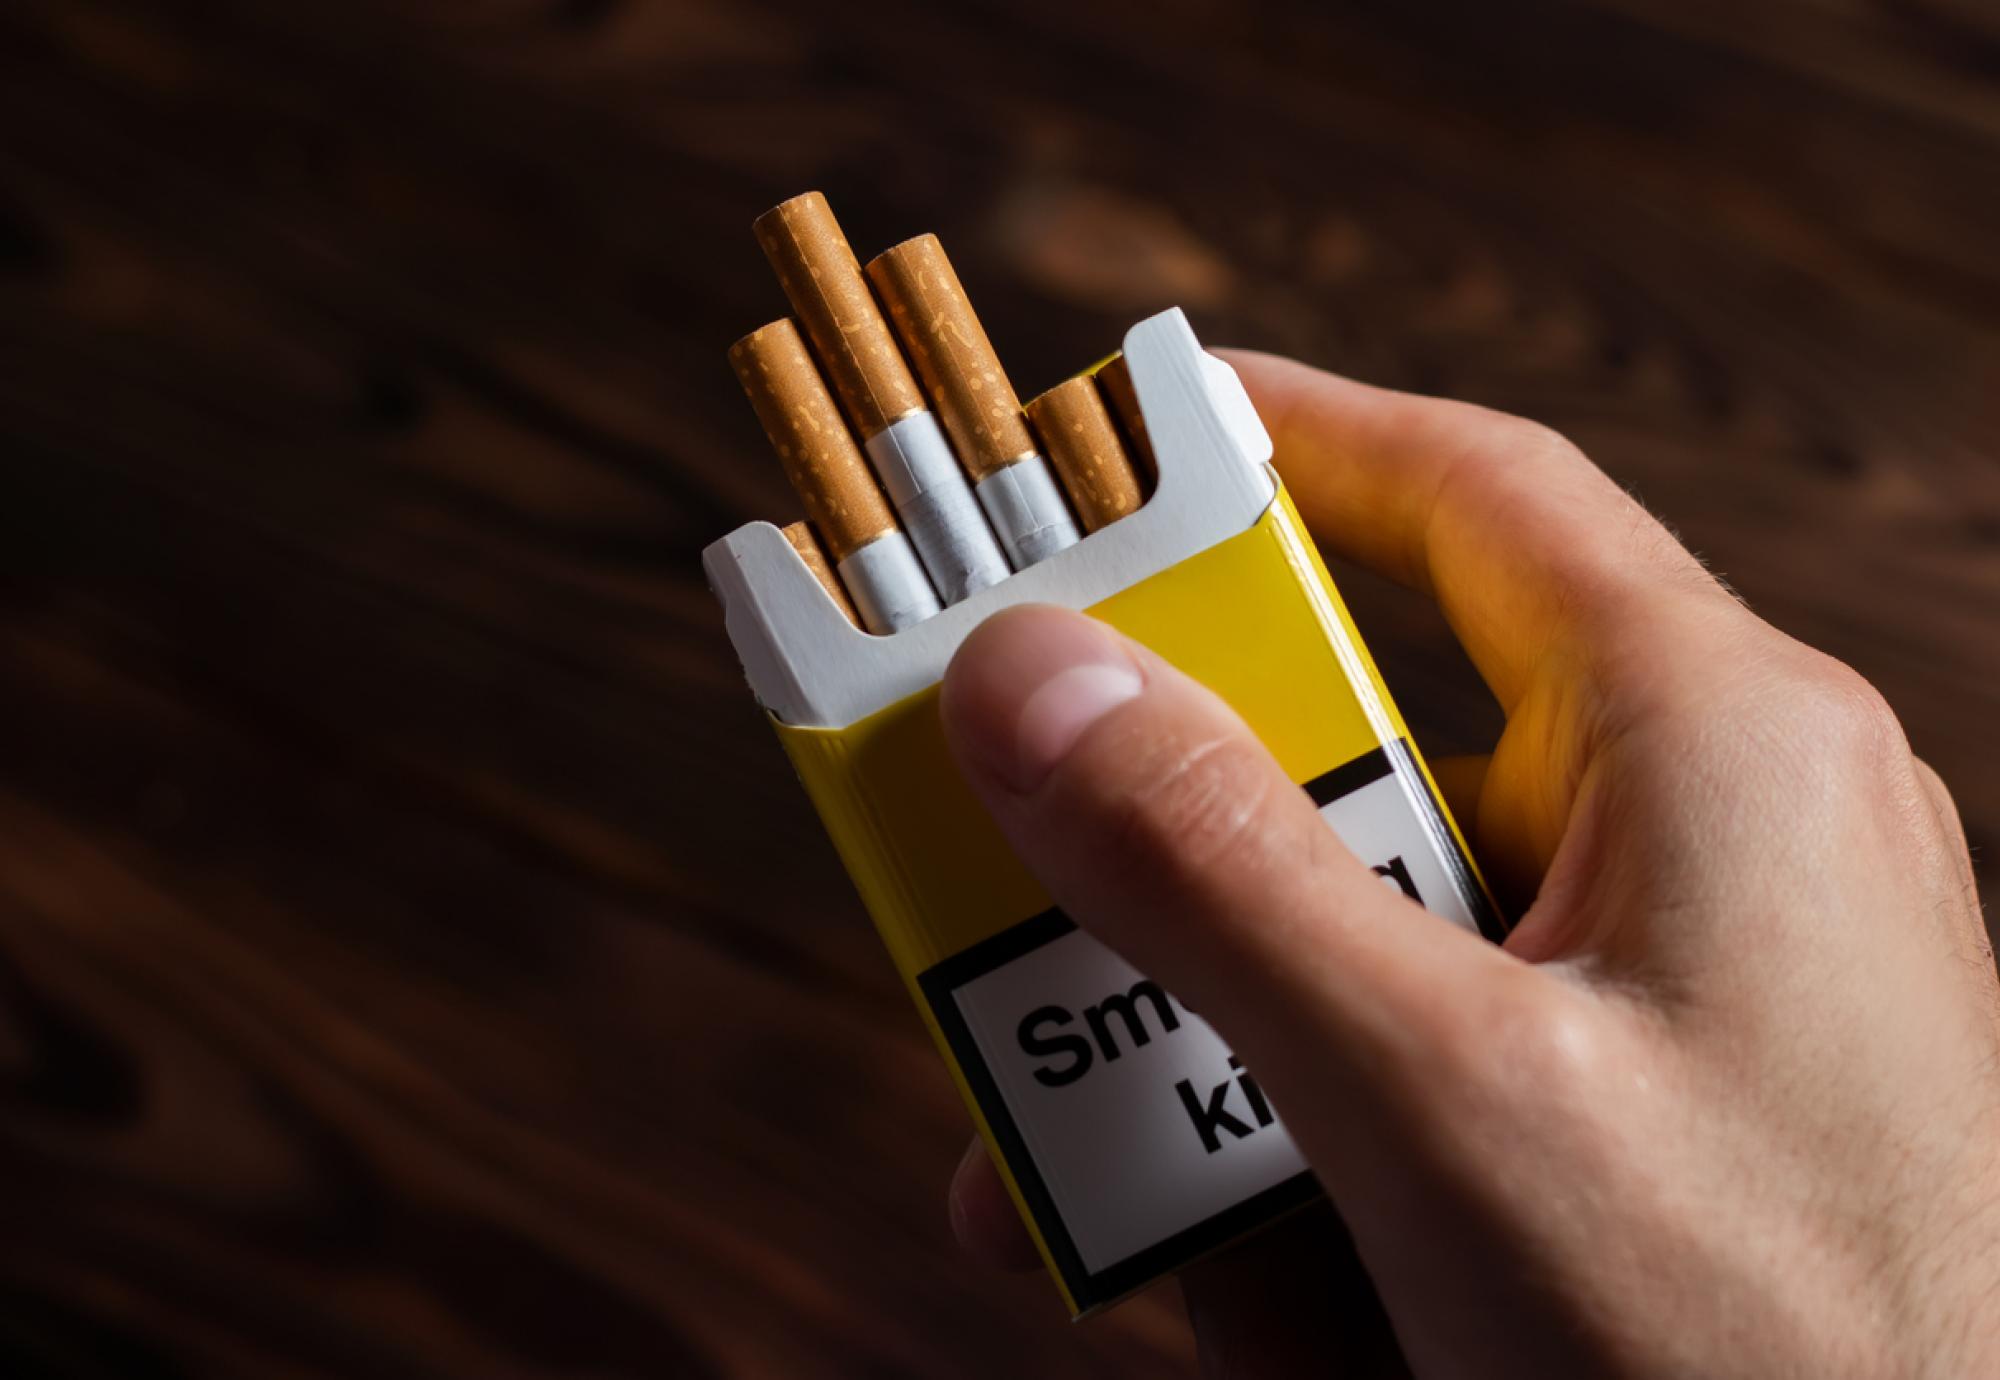 New Zealand's new government says it intends to dump the nation's world-leading smoking ban to fund tax cuts.